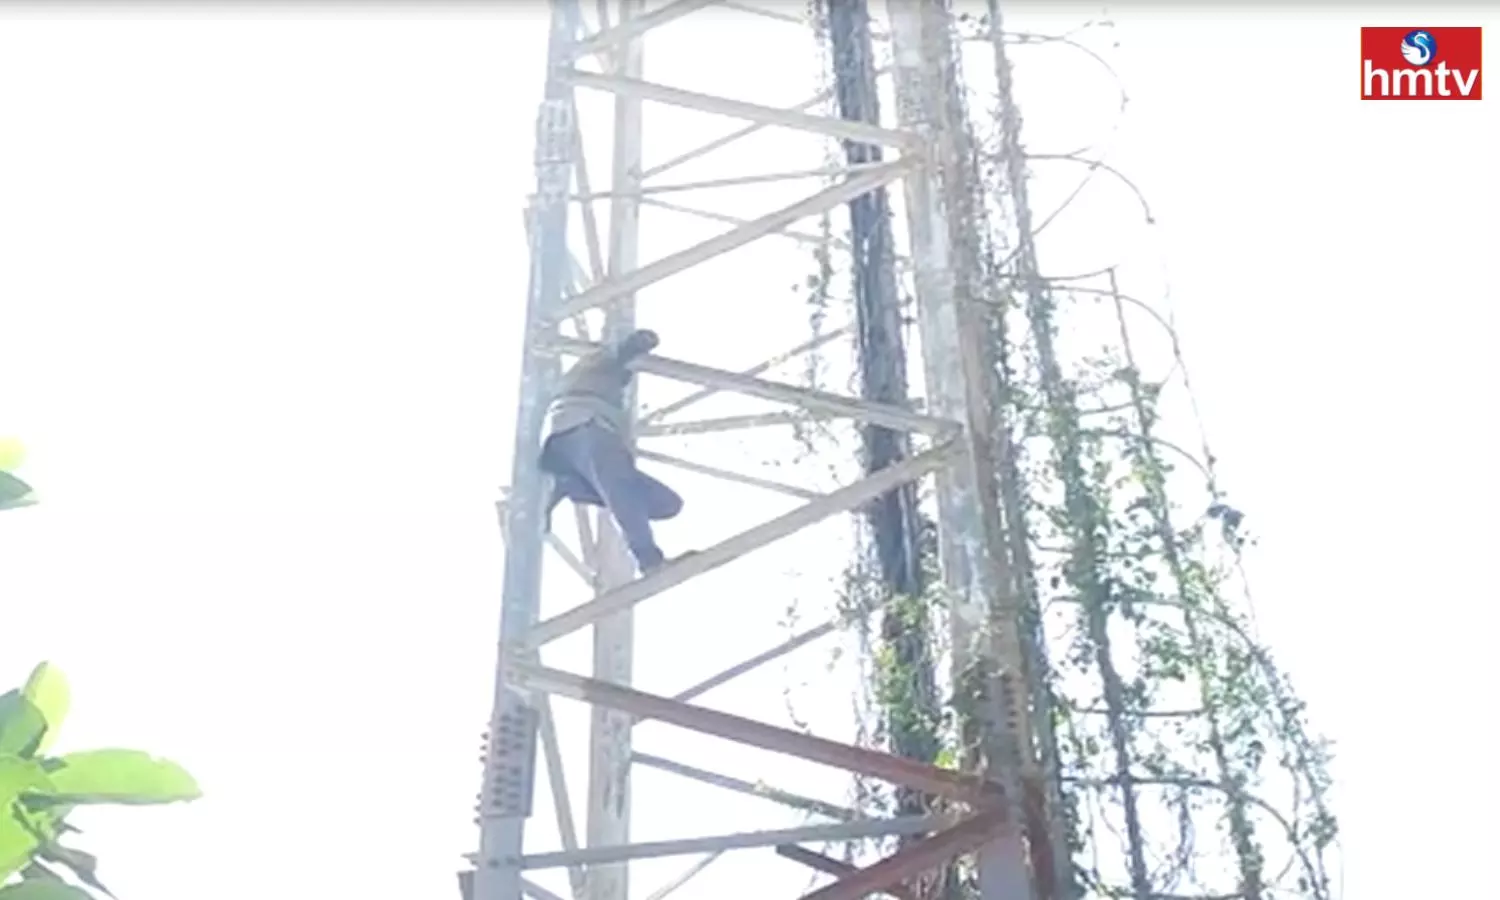 Protest by Climbing the Tower in Mulugu District